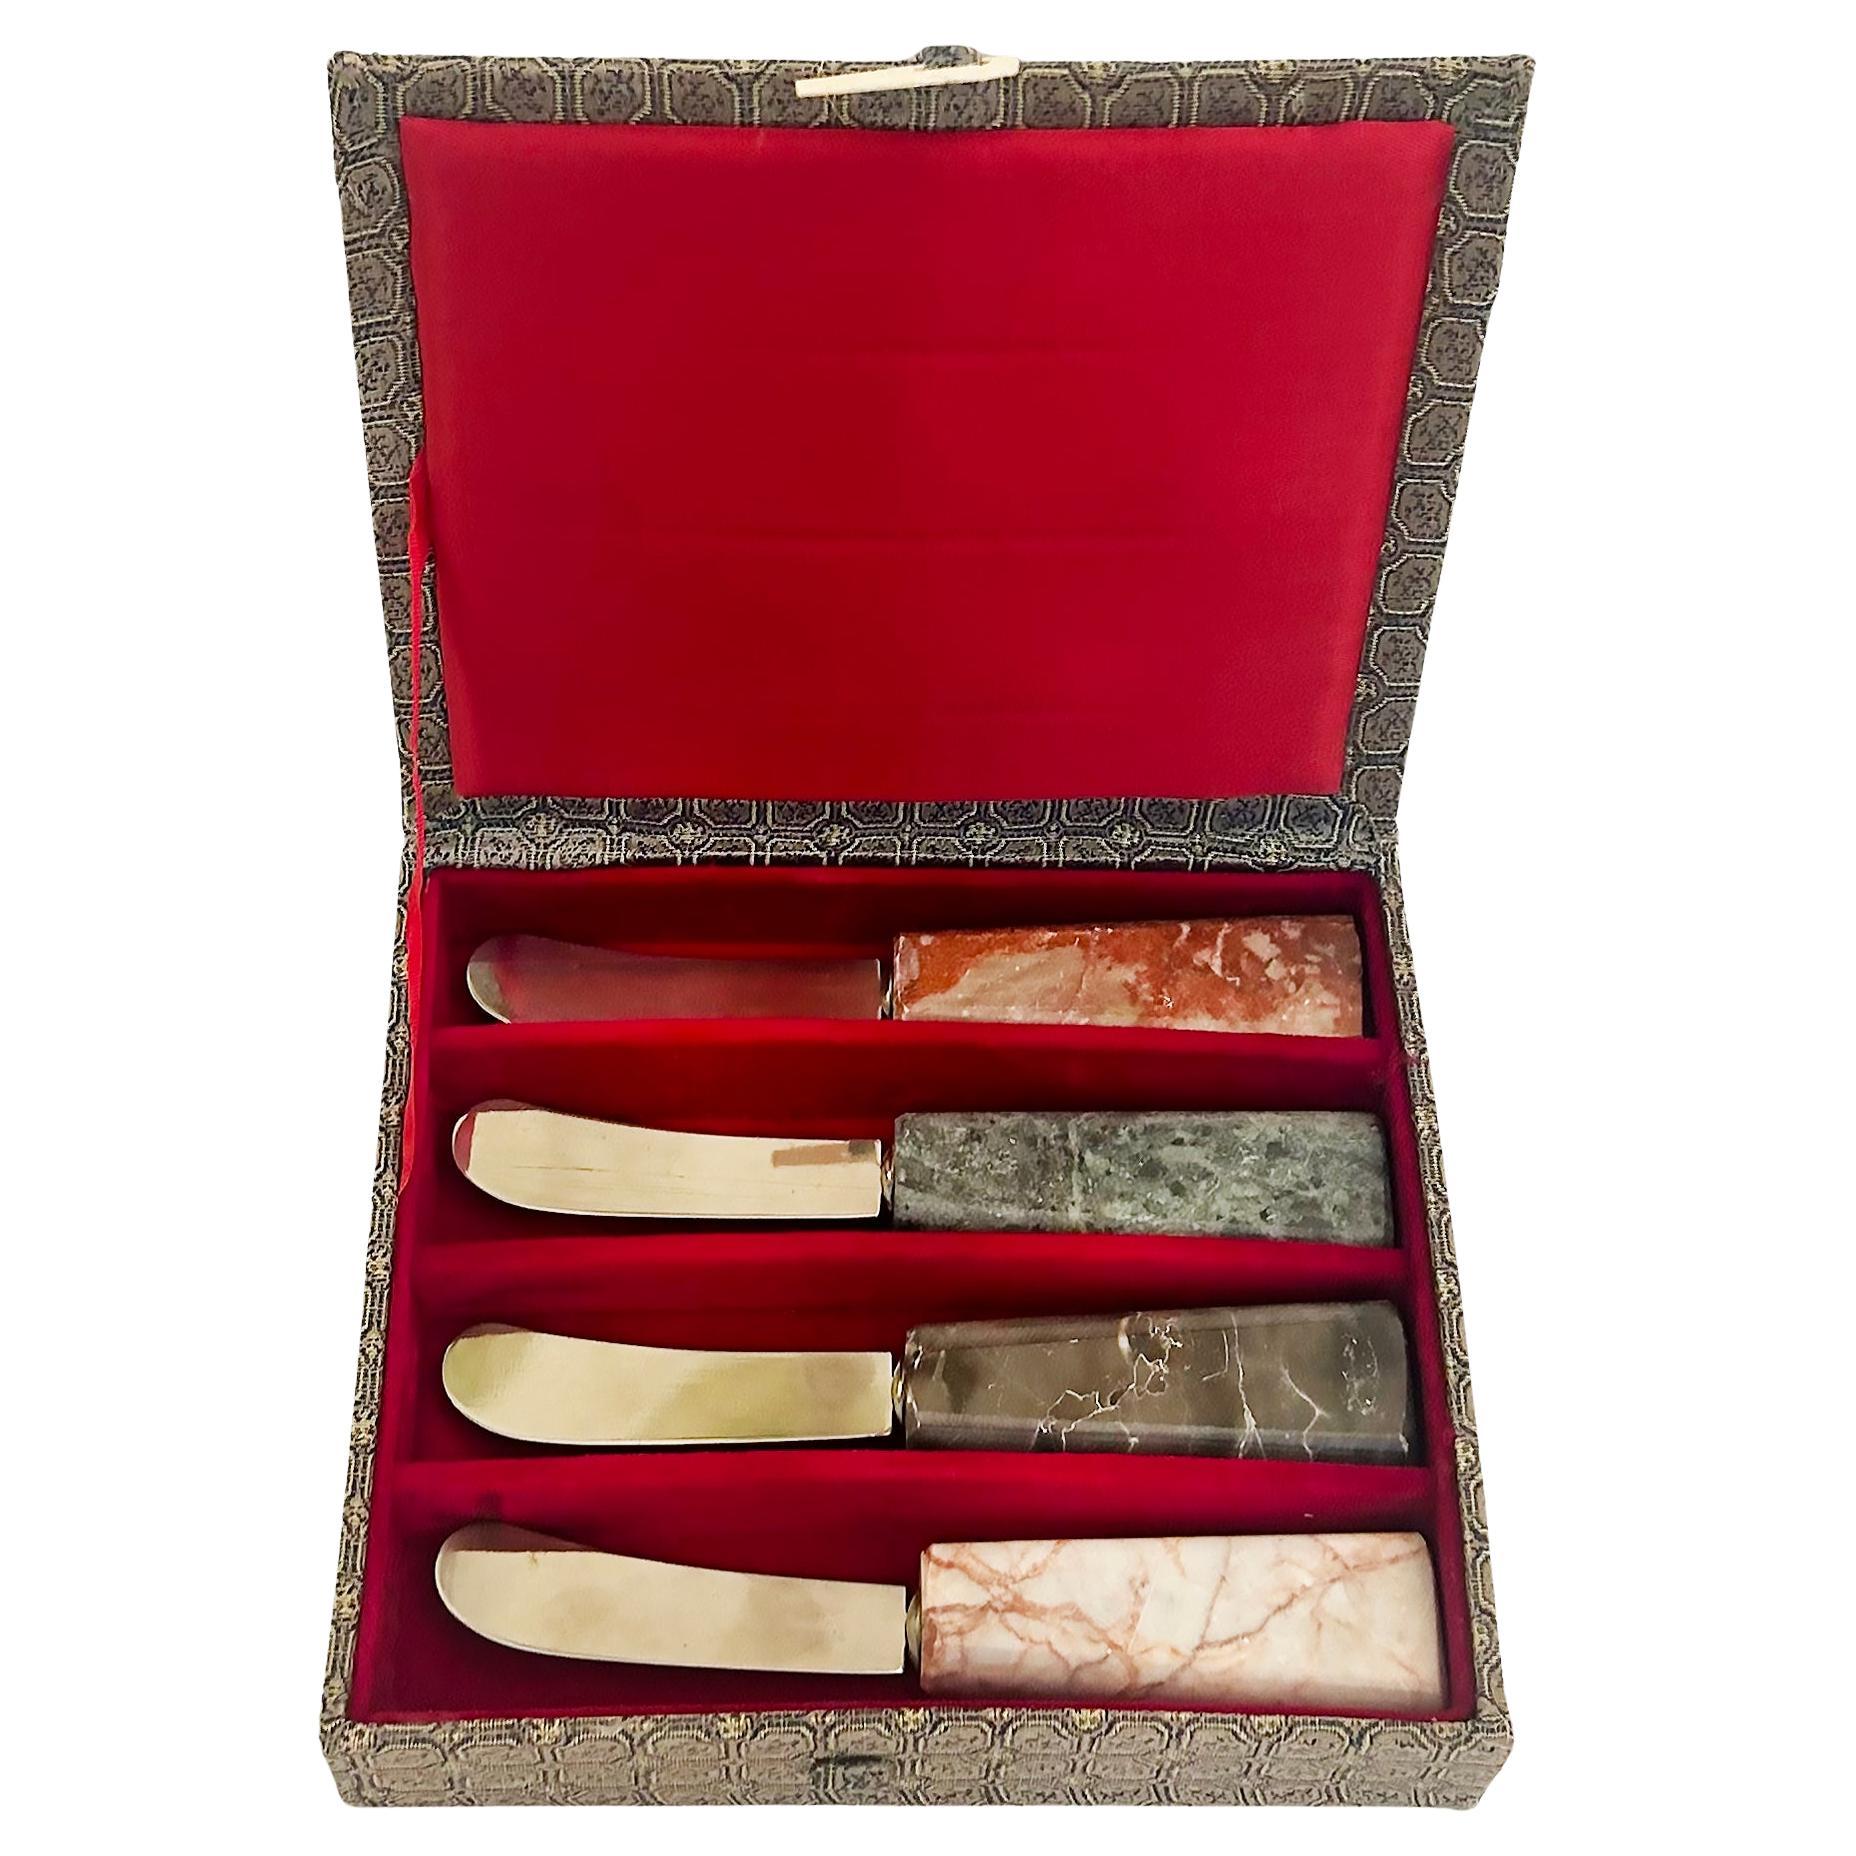 Asian Soft Cheese Spreaders Set with Marble Handles, Stainless, Original Box